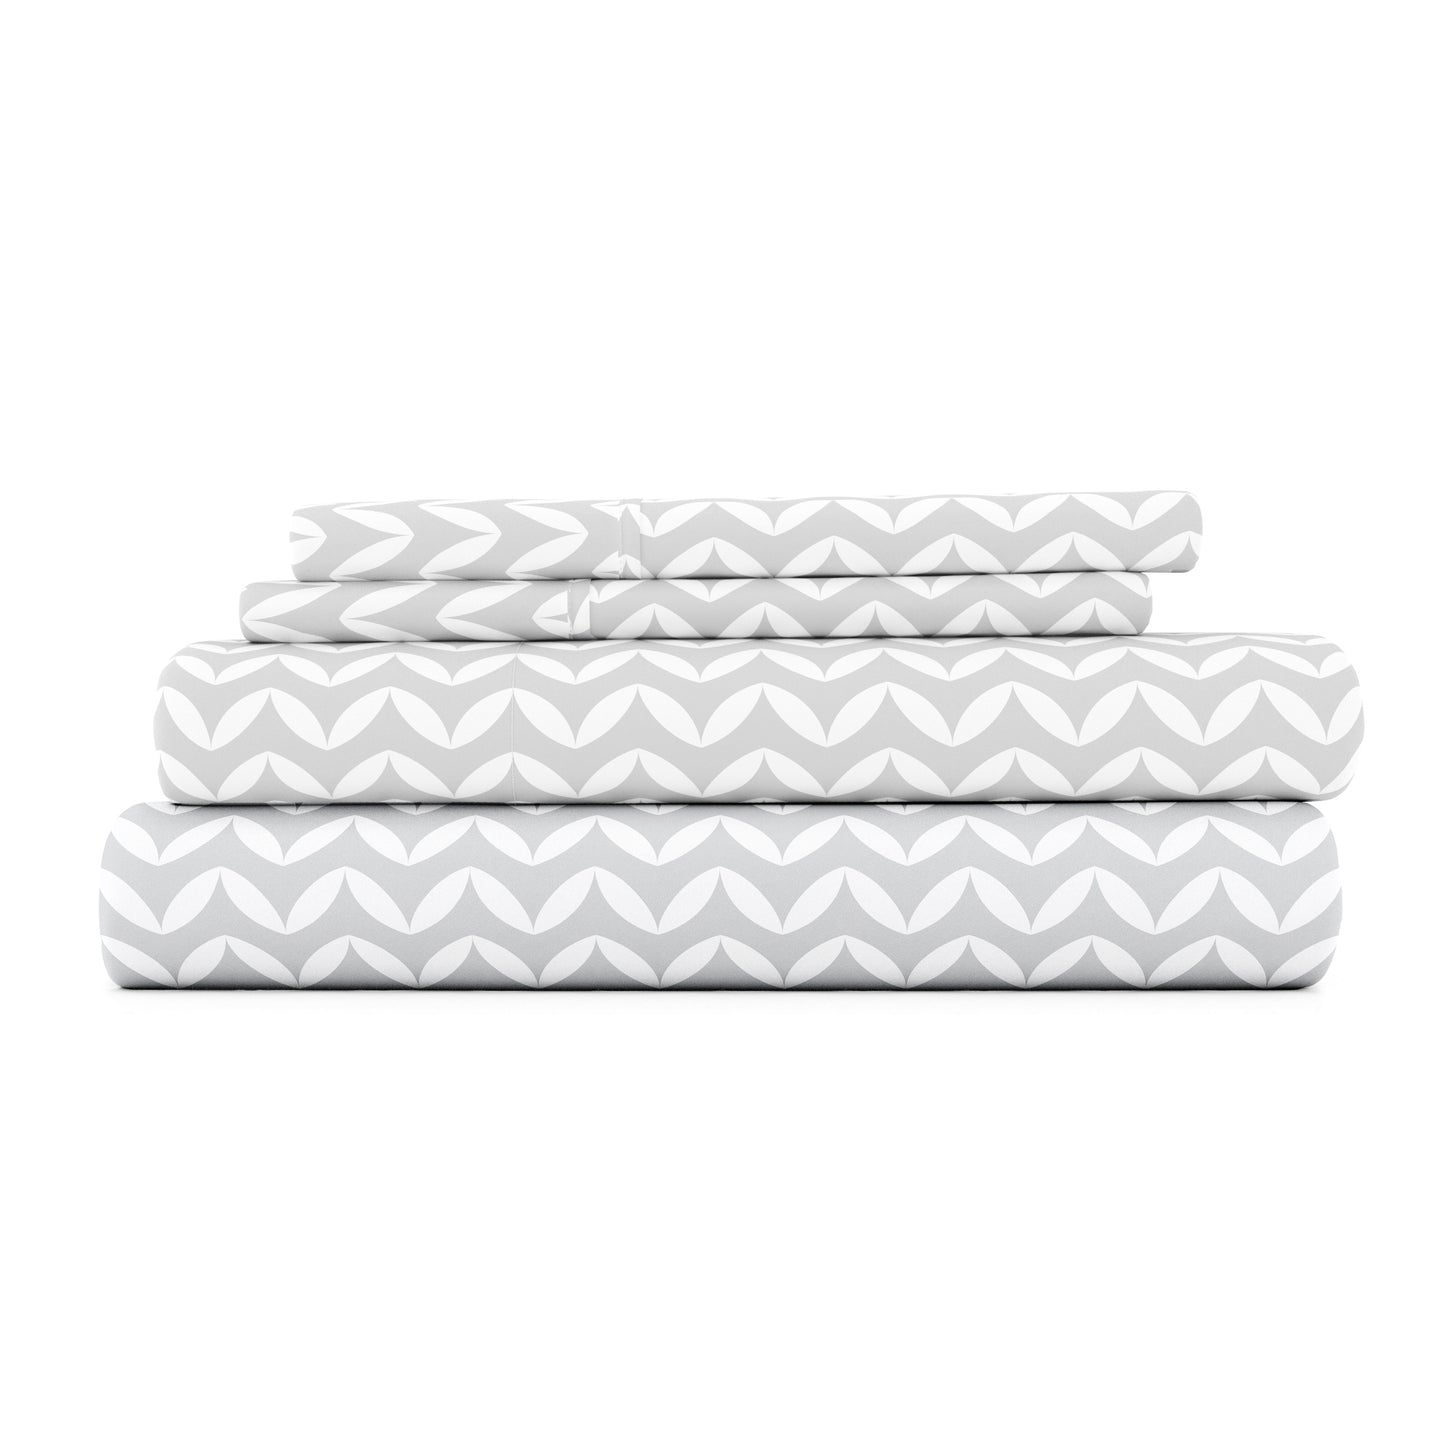 Puffed Chevron Patterned 4-Piece Sheet Set - Linens and Hutch